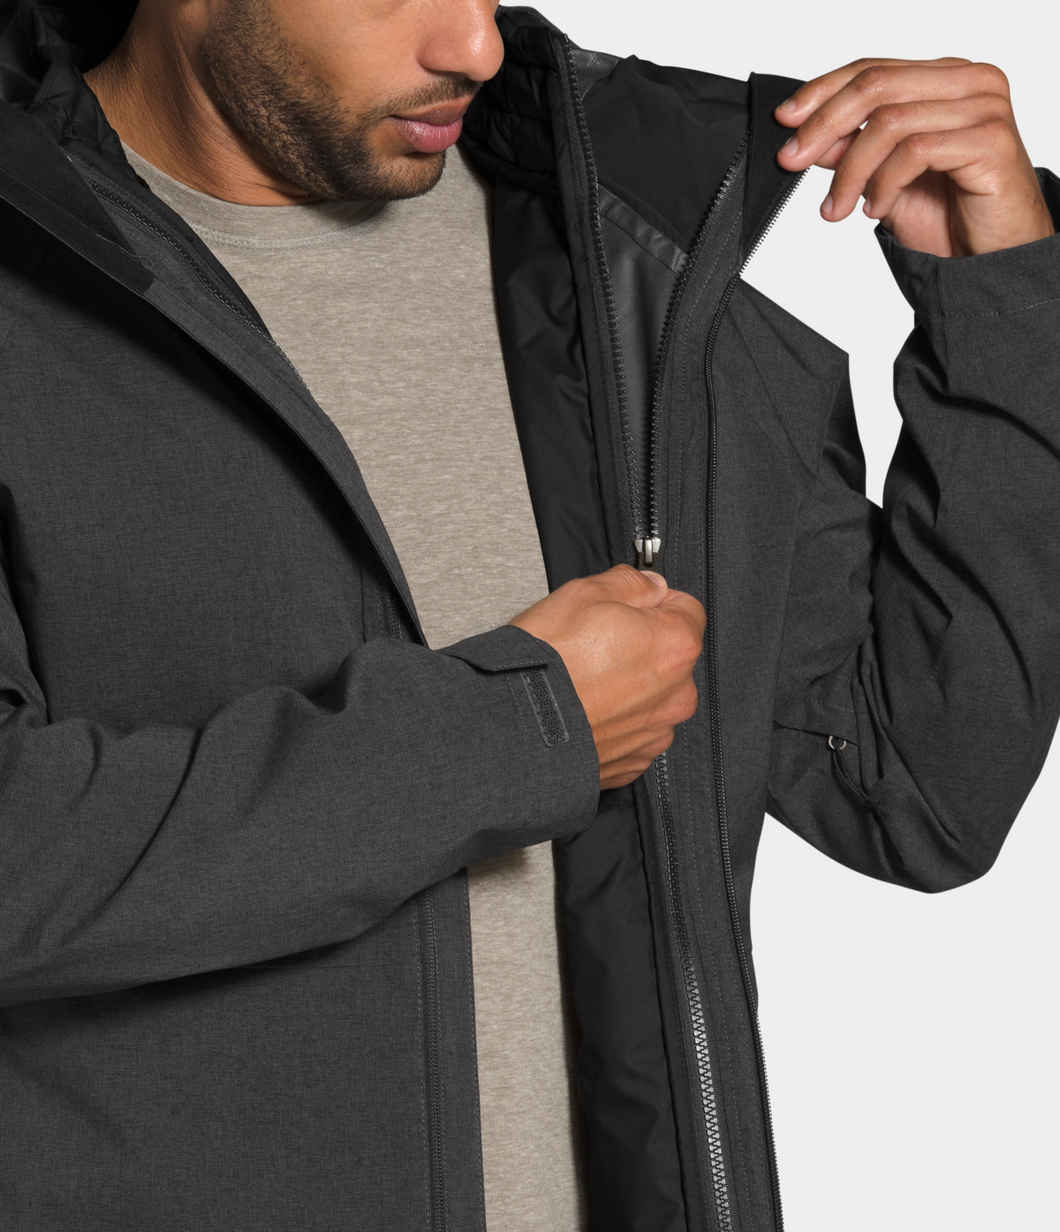 'The North Face' Men's ThermoBall™ Eco Triclimate® Jacket - TNF Dark Grey Heather / TNF Black